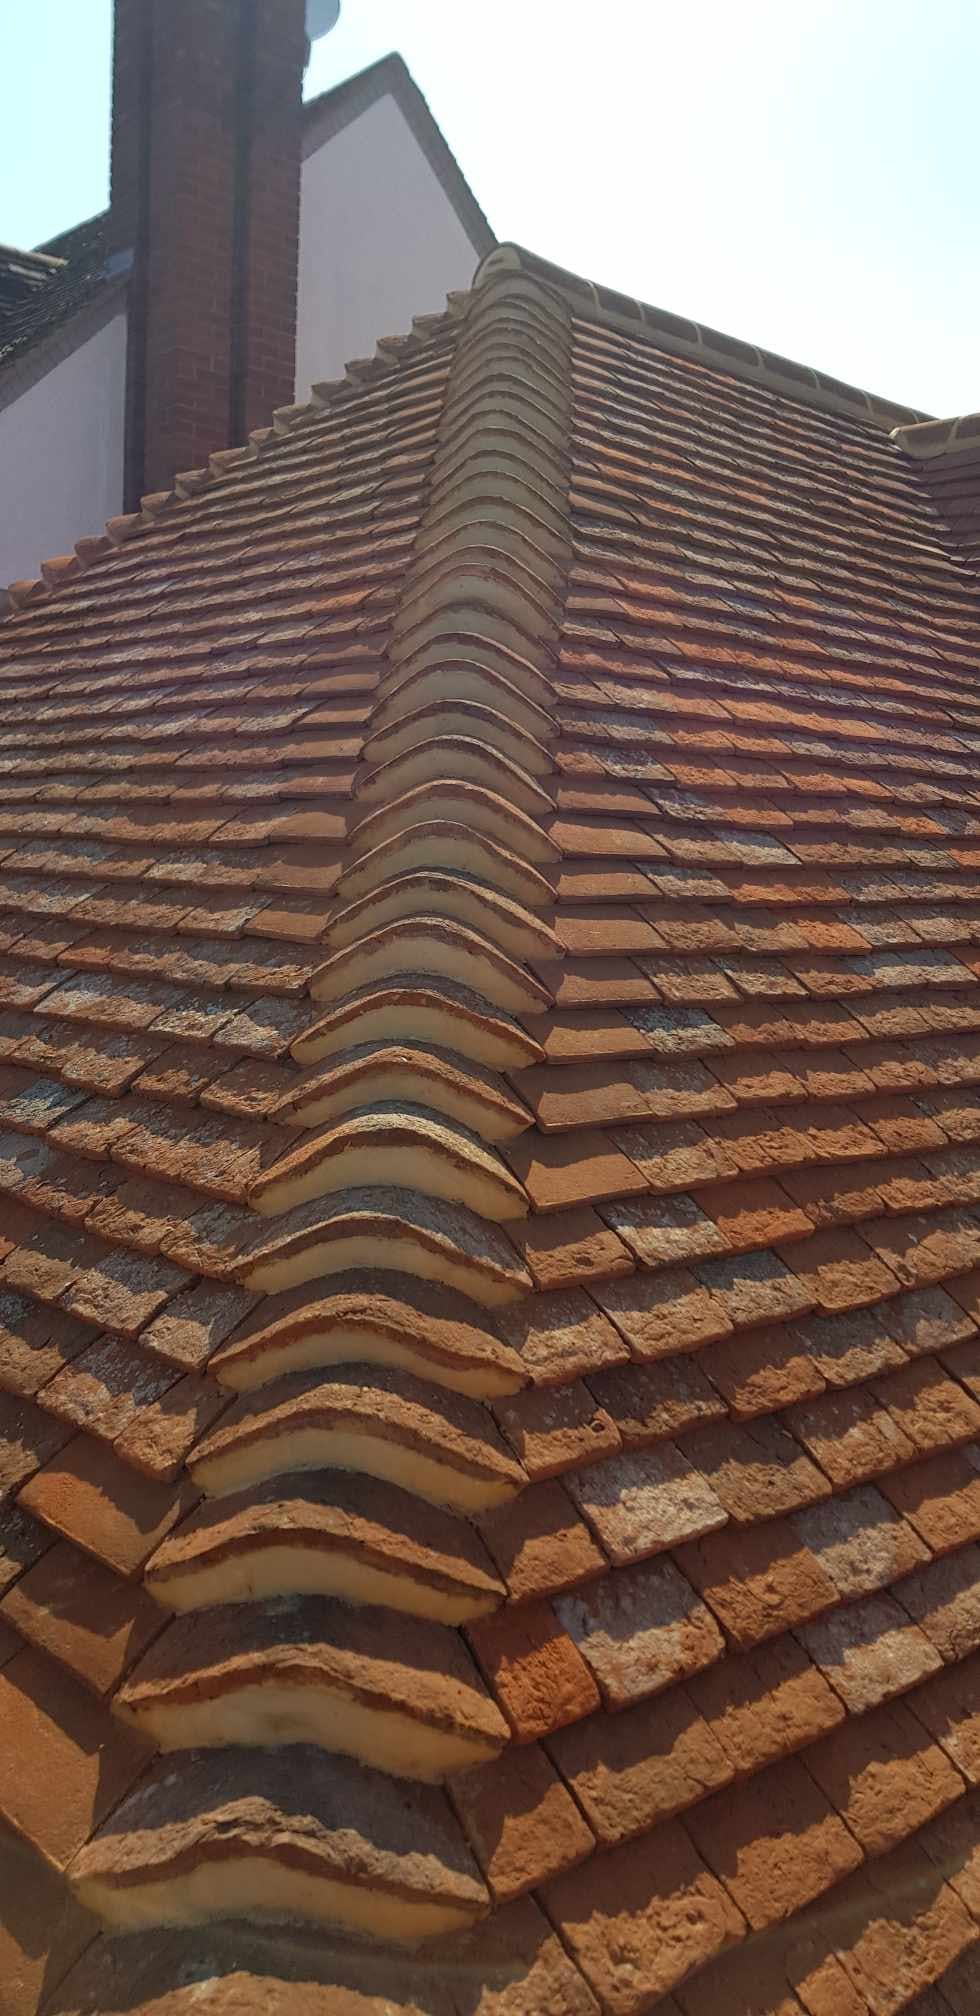 Pitched Roofing (Tiles)